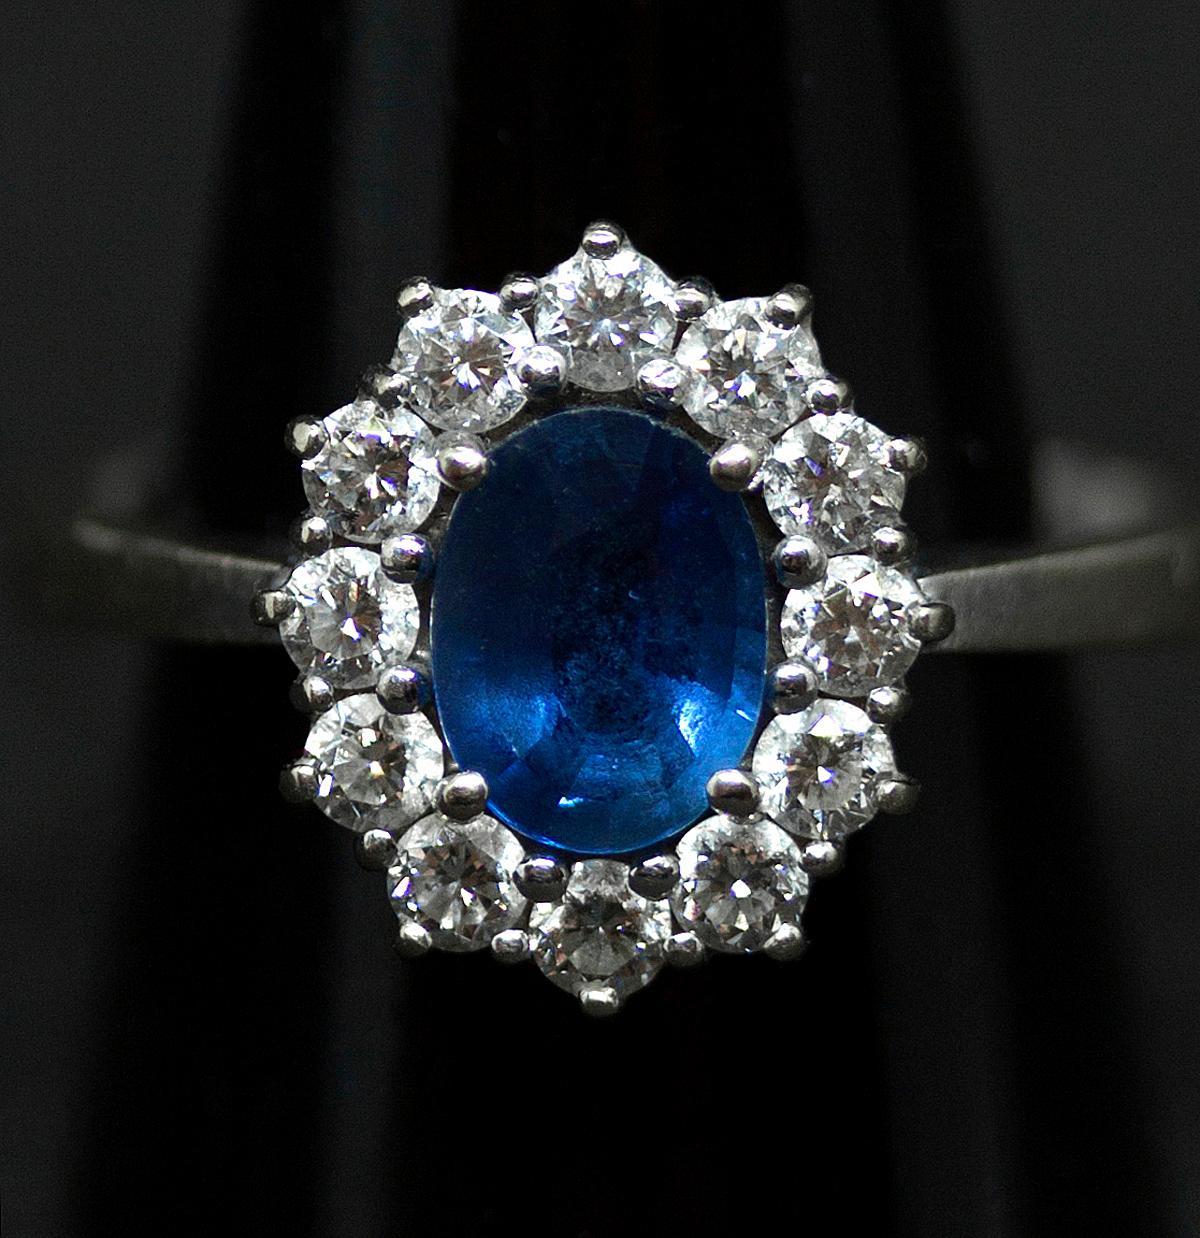 Classic oval-shaped sapphire and brilliant-cut diamonds ring with a centered facetted saphire, surounded by round brilliant-cut diamonds estimated to weigh a total of 1.0 carat, claw set in a white gold mount.
 
Austria, circa 1960

head measuring 